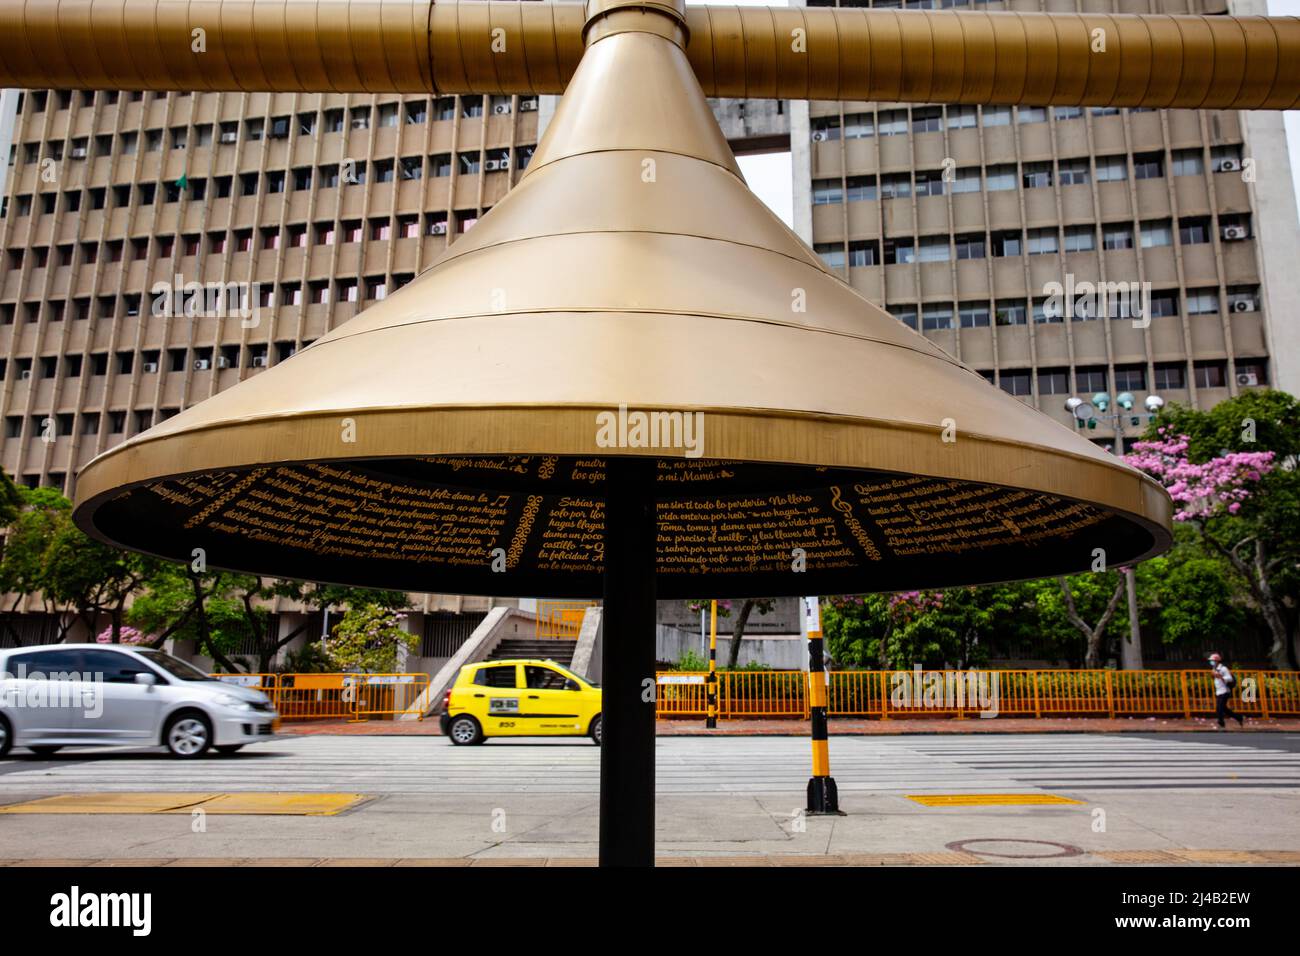 CALI, COLOMBIA - AUGUST 2021. View of the well known Jairo Varela Plaza and the Municipal Administrative Center (CAM) building in Cali Stock Photo